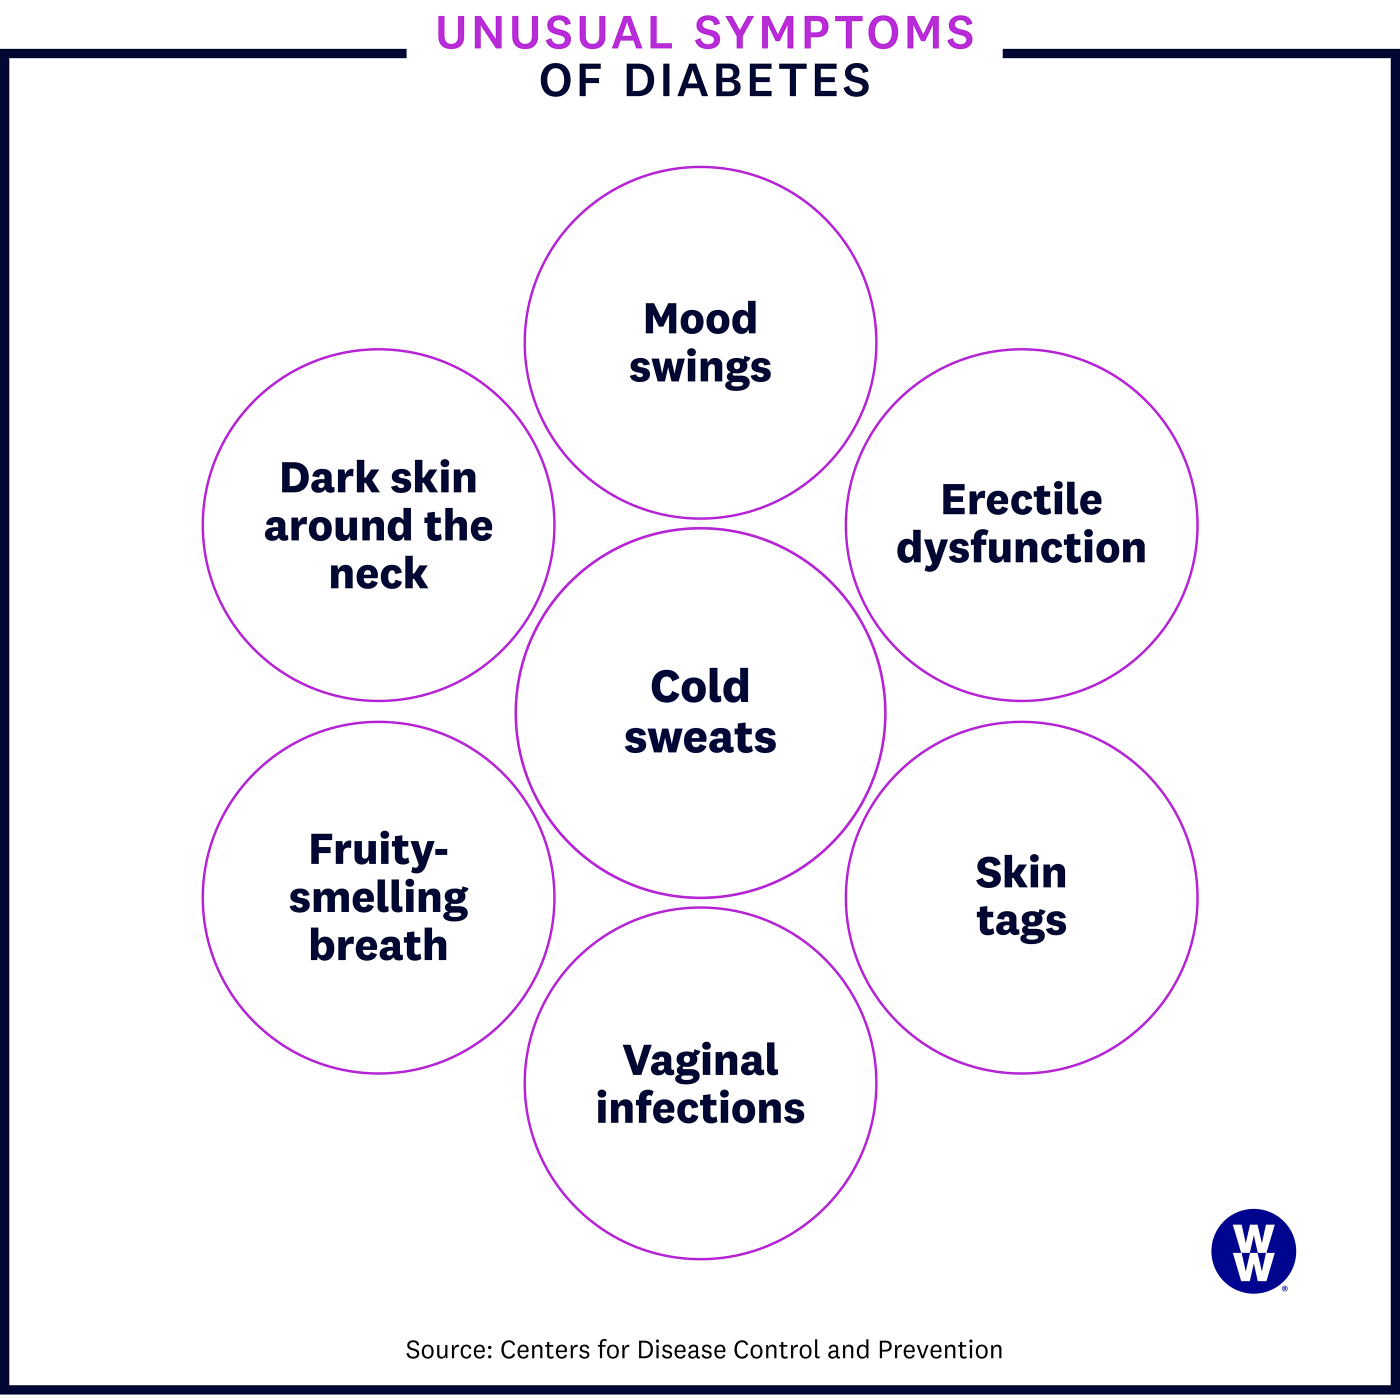 Unusual symptoms of diabetes infographic: mood swings, erectile dysfunction, skin tags, vaginal infections, fruity-smelling breath, dark skin around the neck, cold sweats.